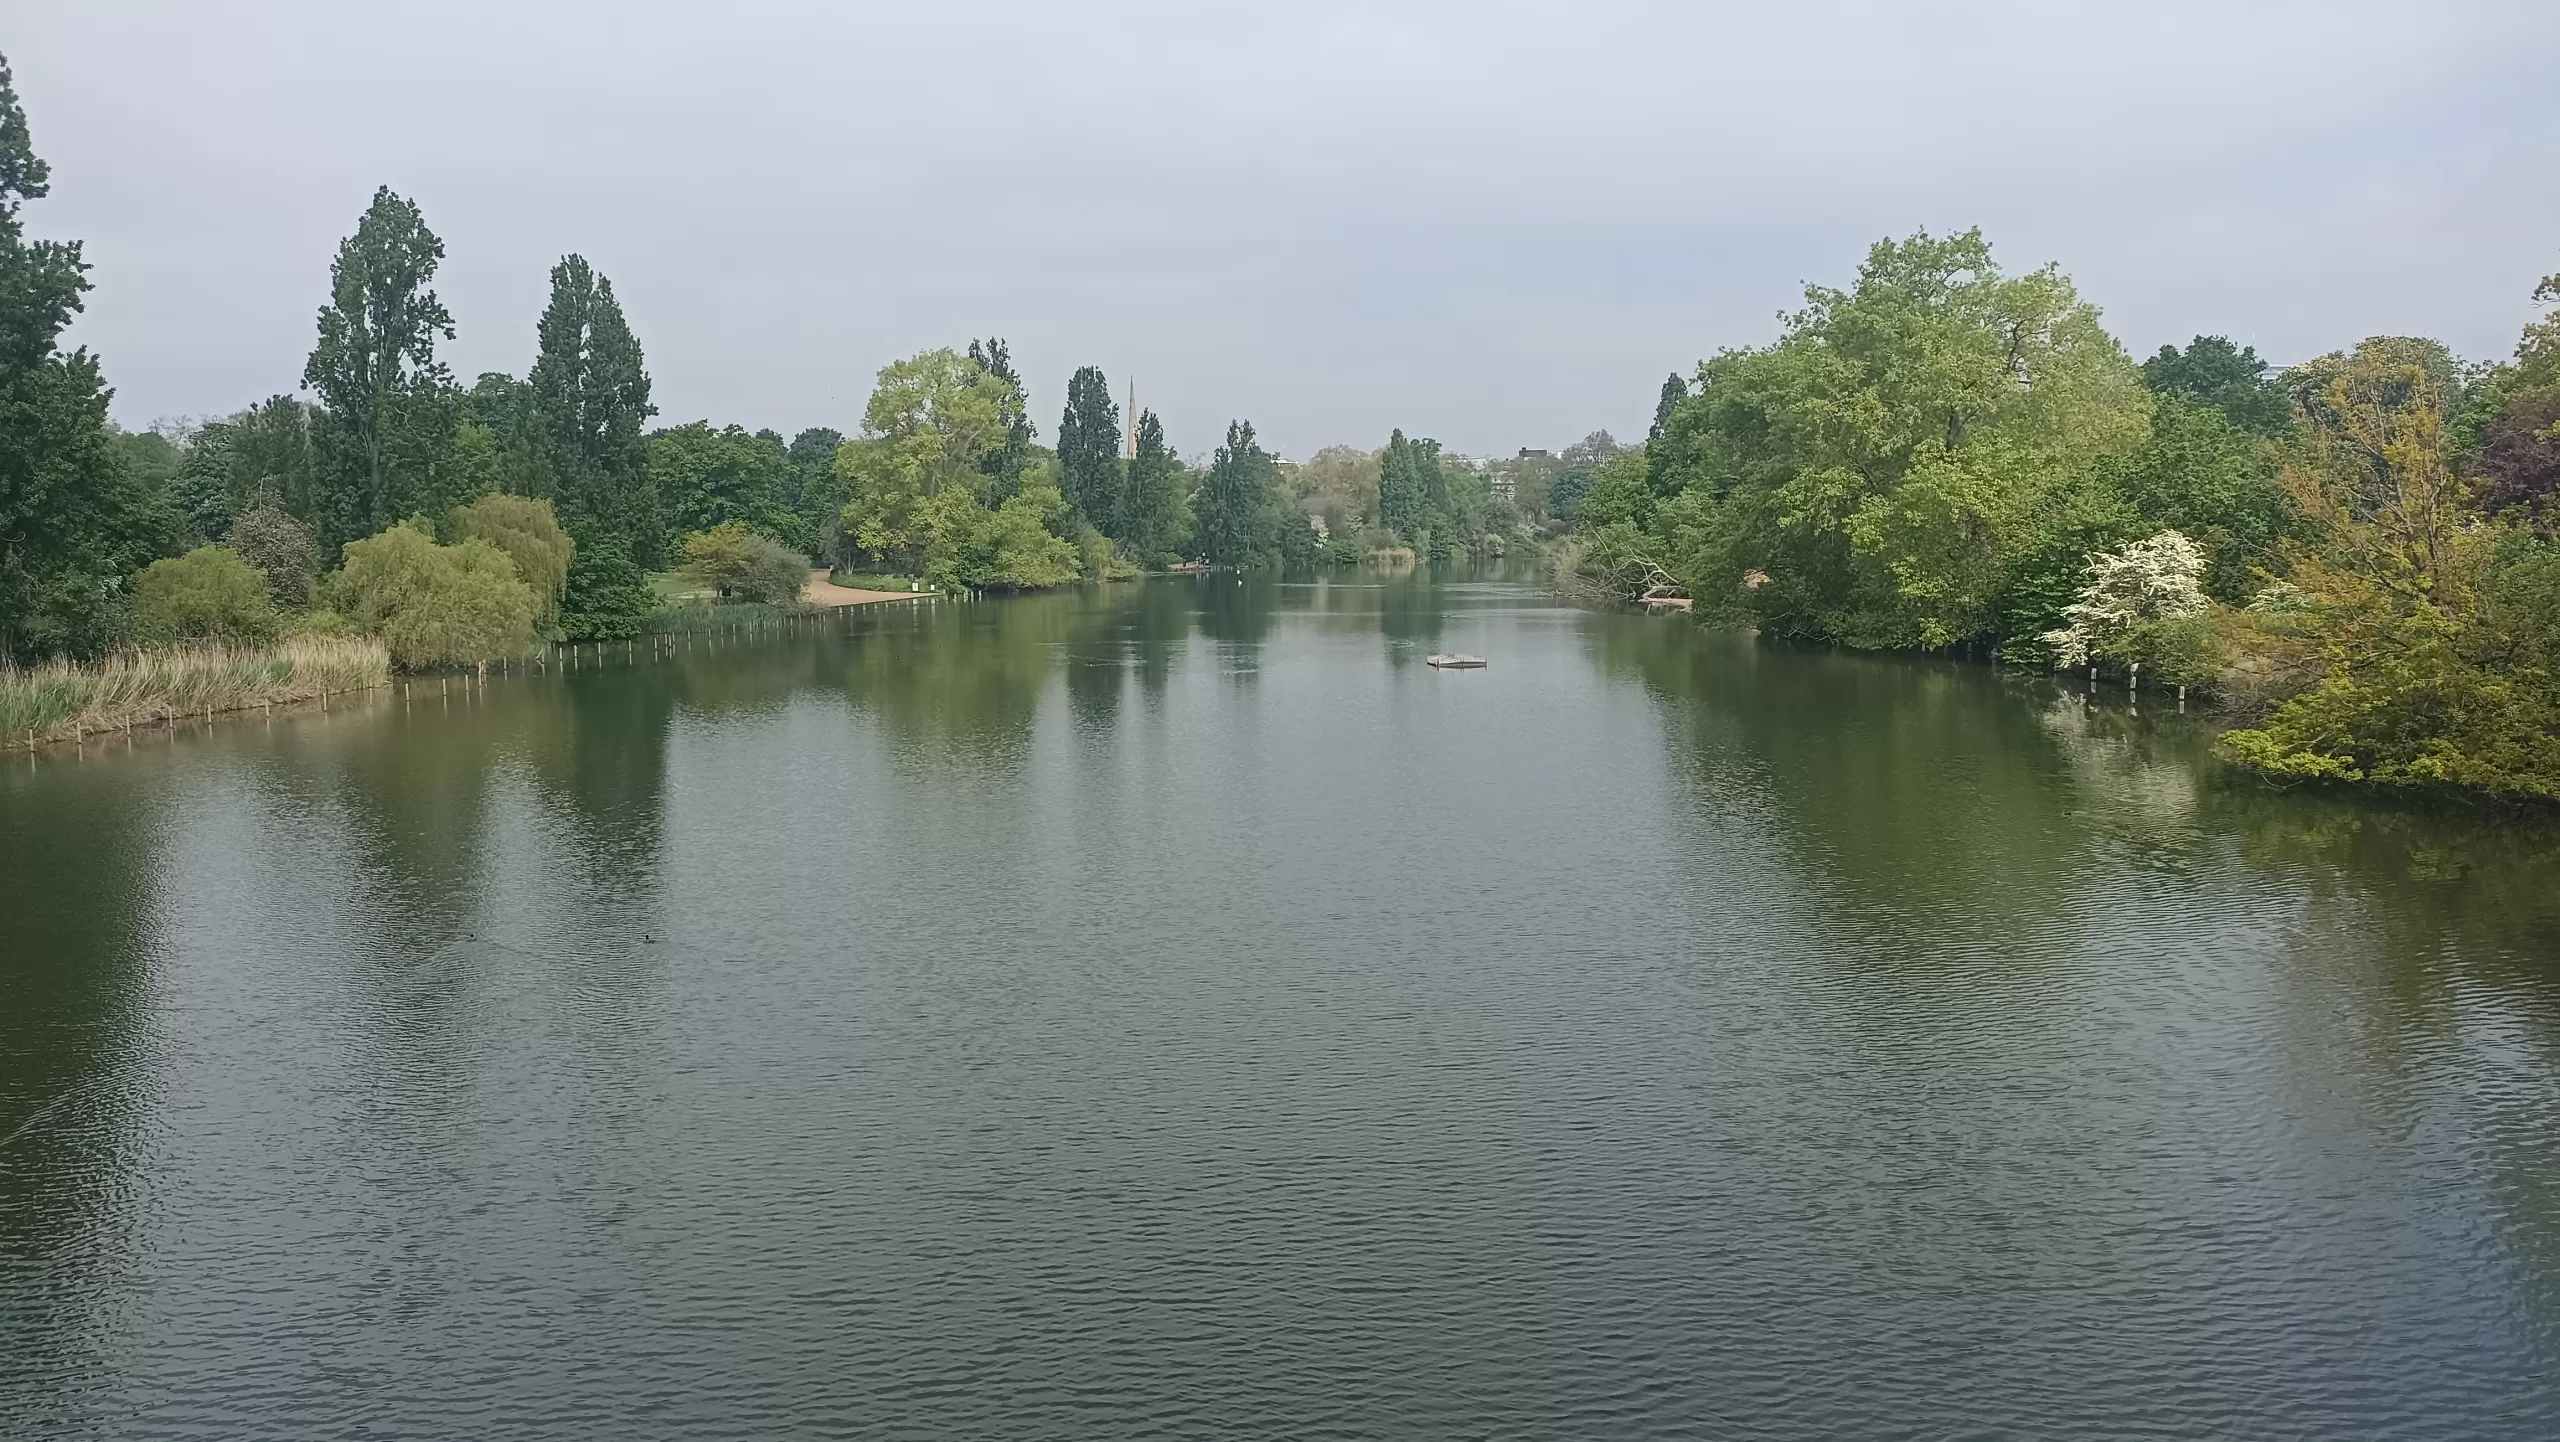 View from the Serpentine Bridge, Hyde Park, London